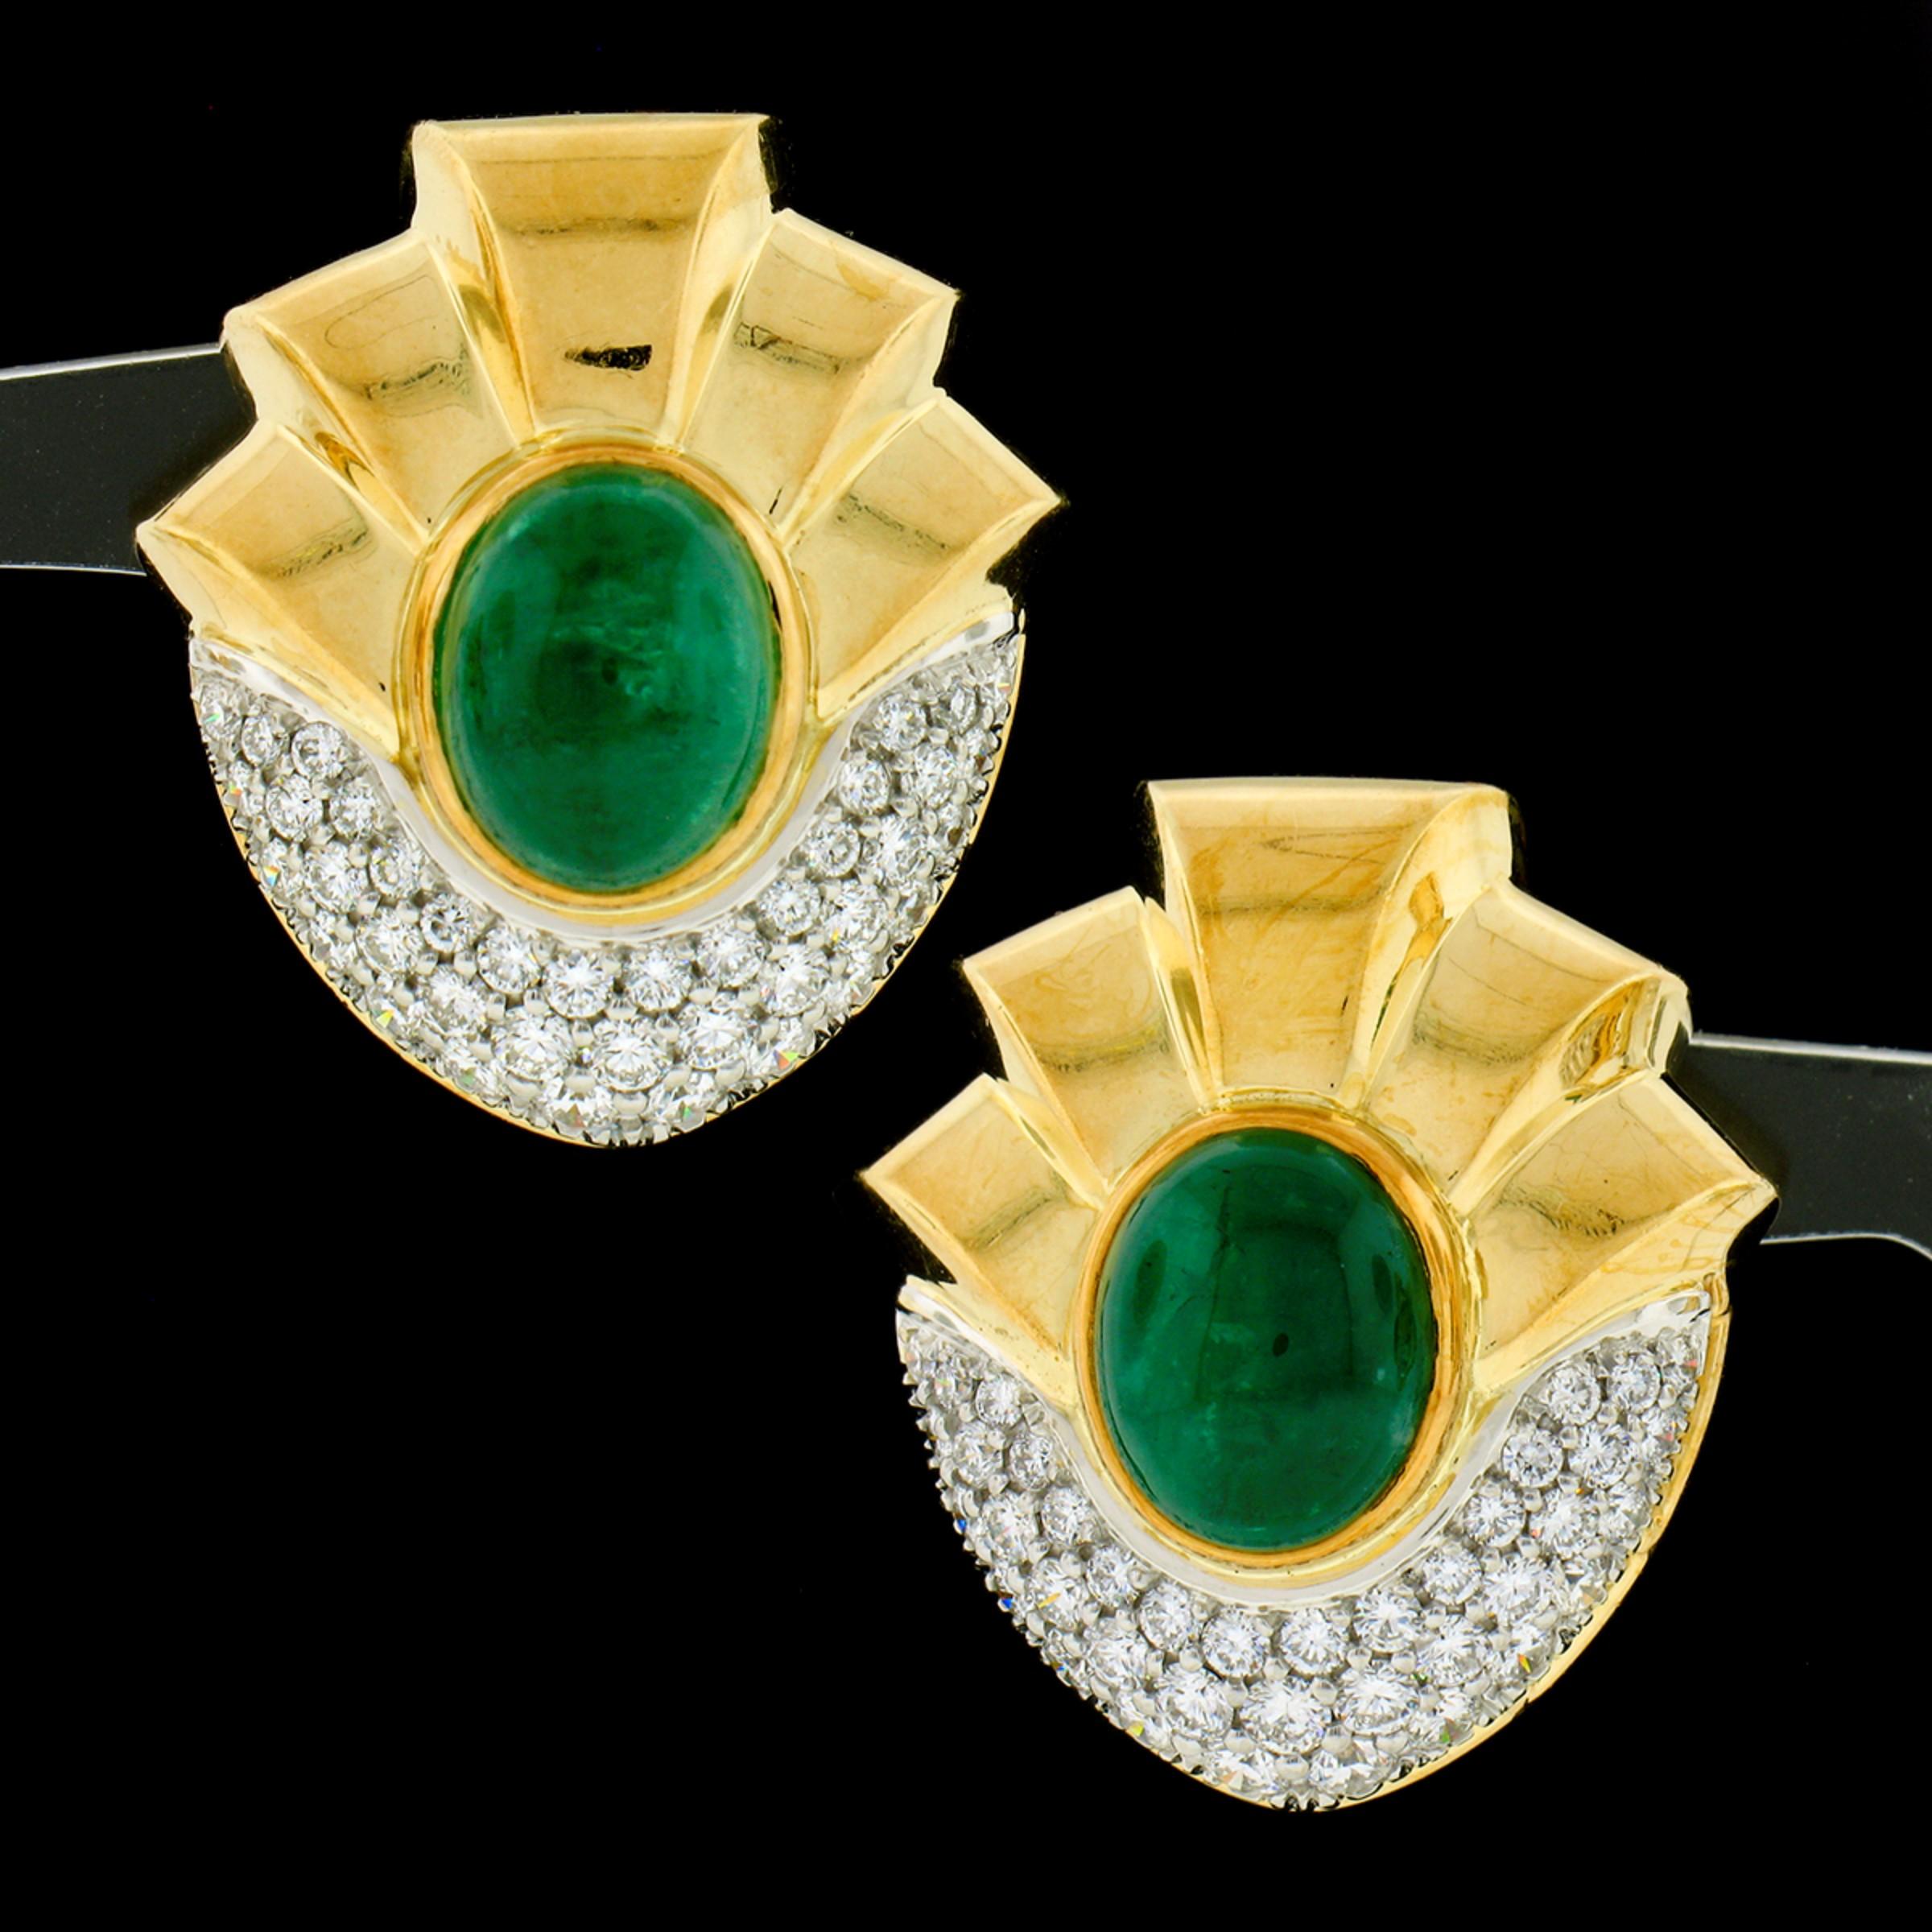 This magnificent vintage pair of natural emerald and diamond statement earrings was crafted from solid 18k yellow gold. The earrings feature a pair of beautiful, GIA certified, oval cabochon cut emeralds that are perfectly bezel set at the center of